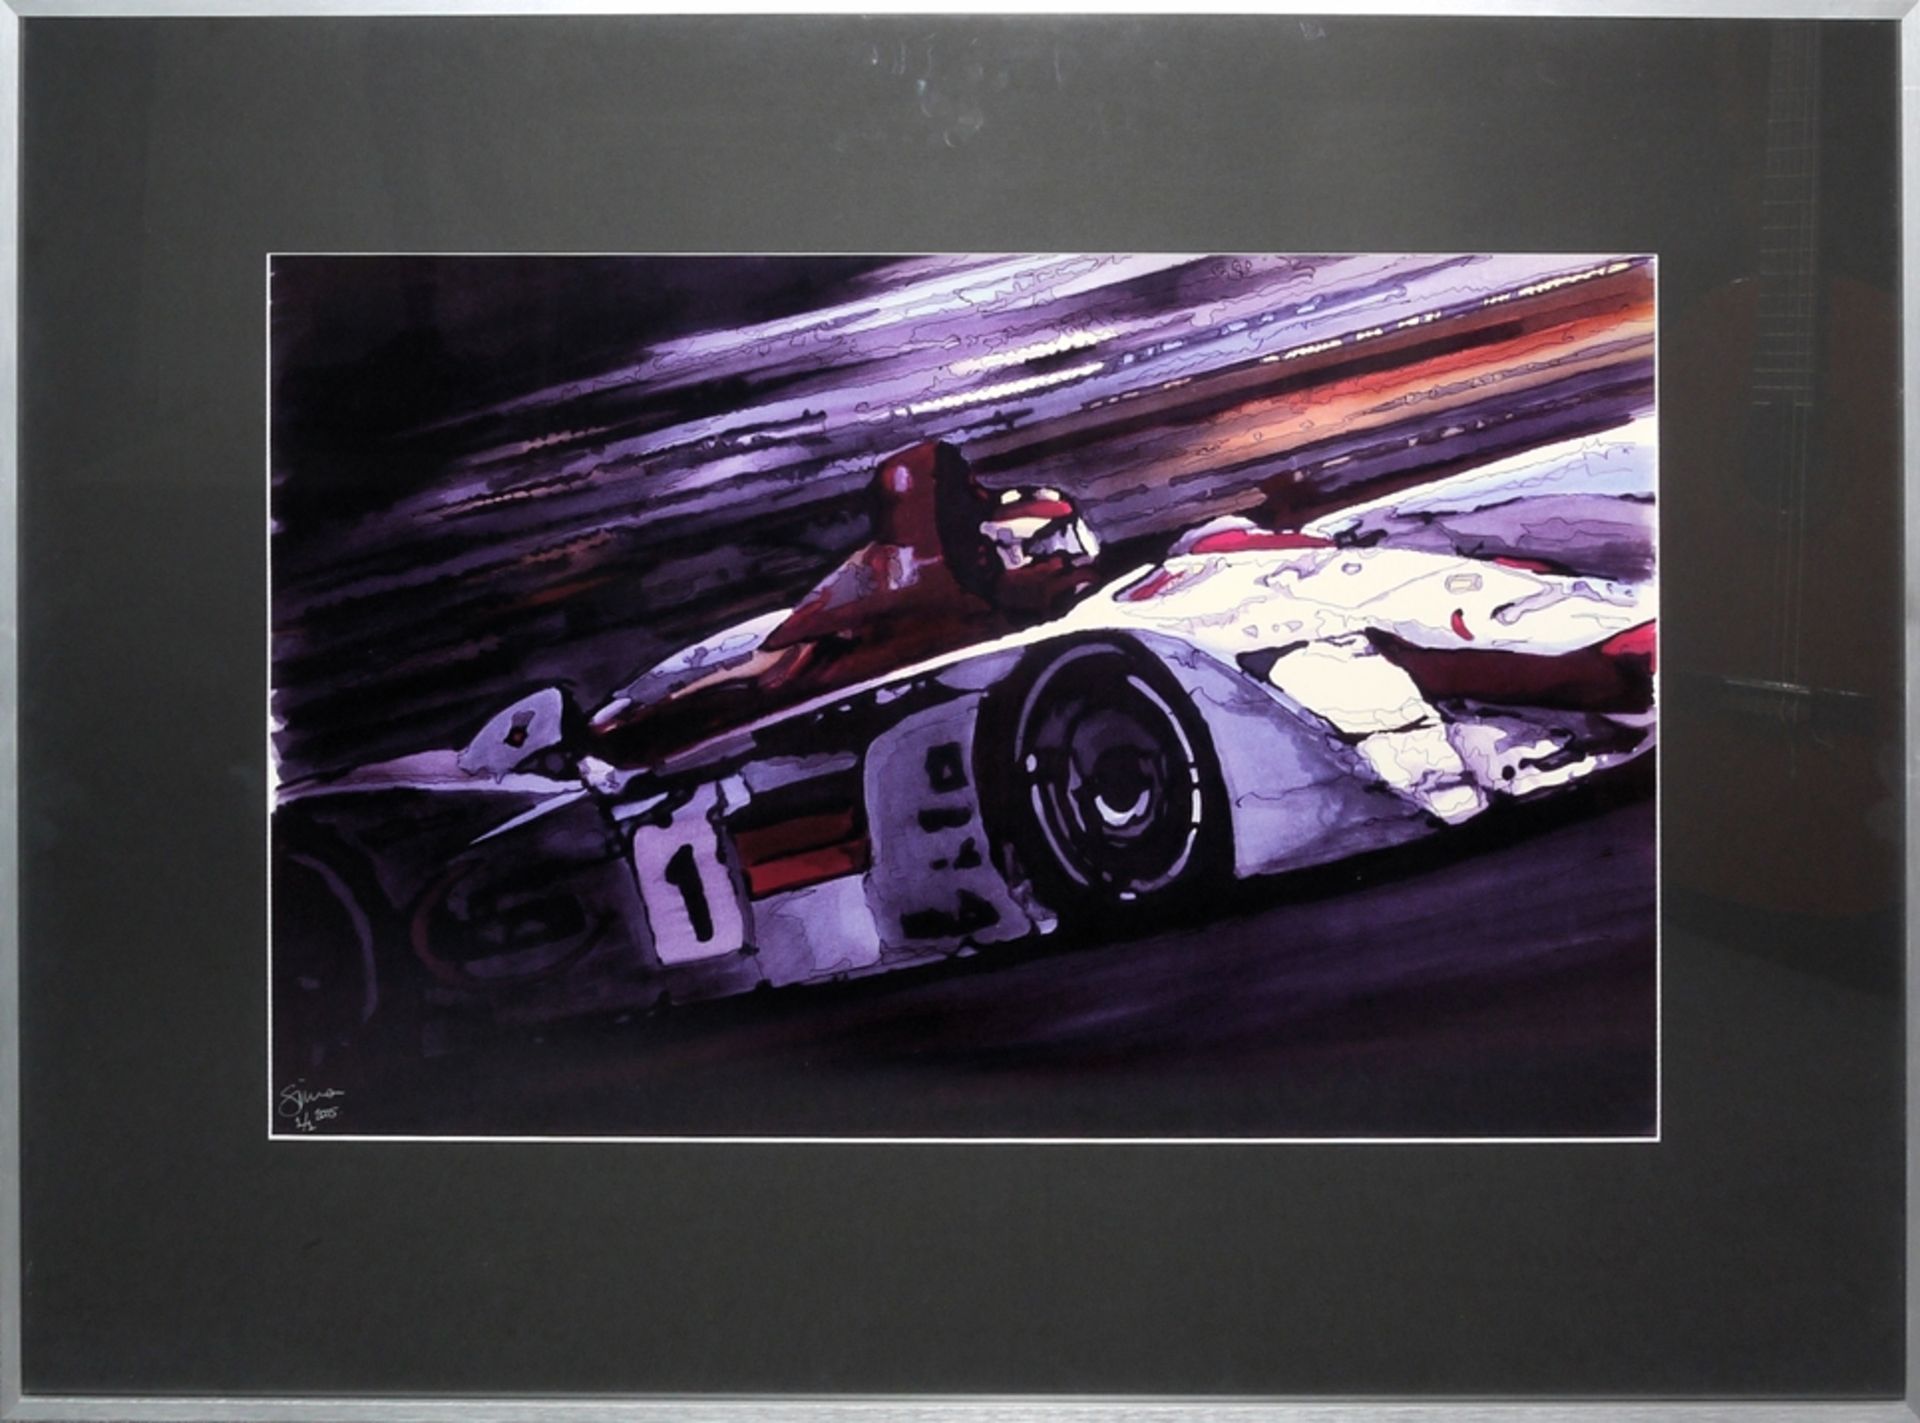 7 x Art for Car and Automobile Fans: Louis Baillon, Paul Bracq, Andreas Hentrich, Simon Loasby, Ern - Image 2 of 13